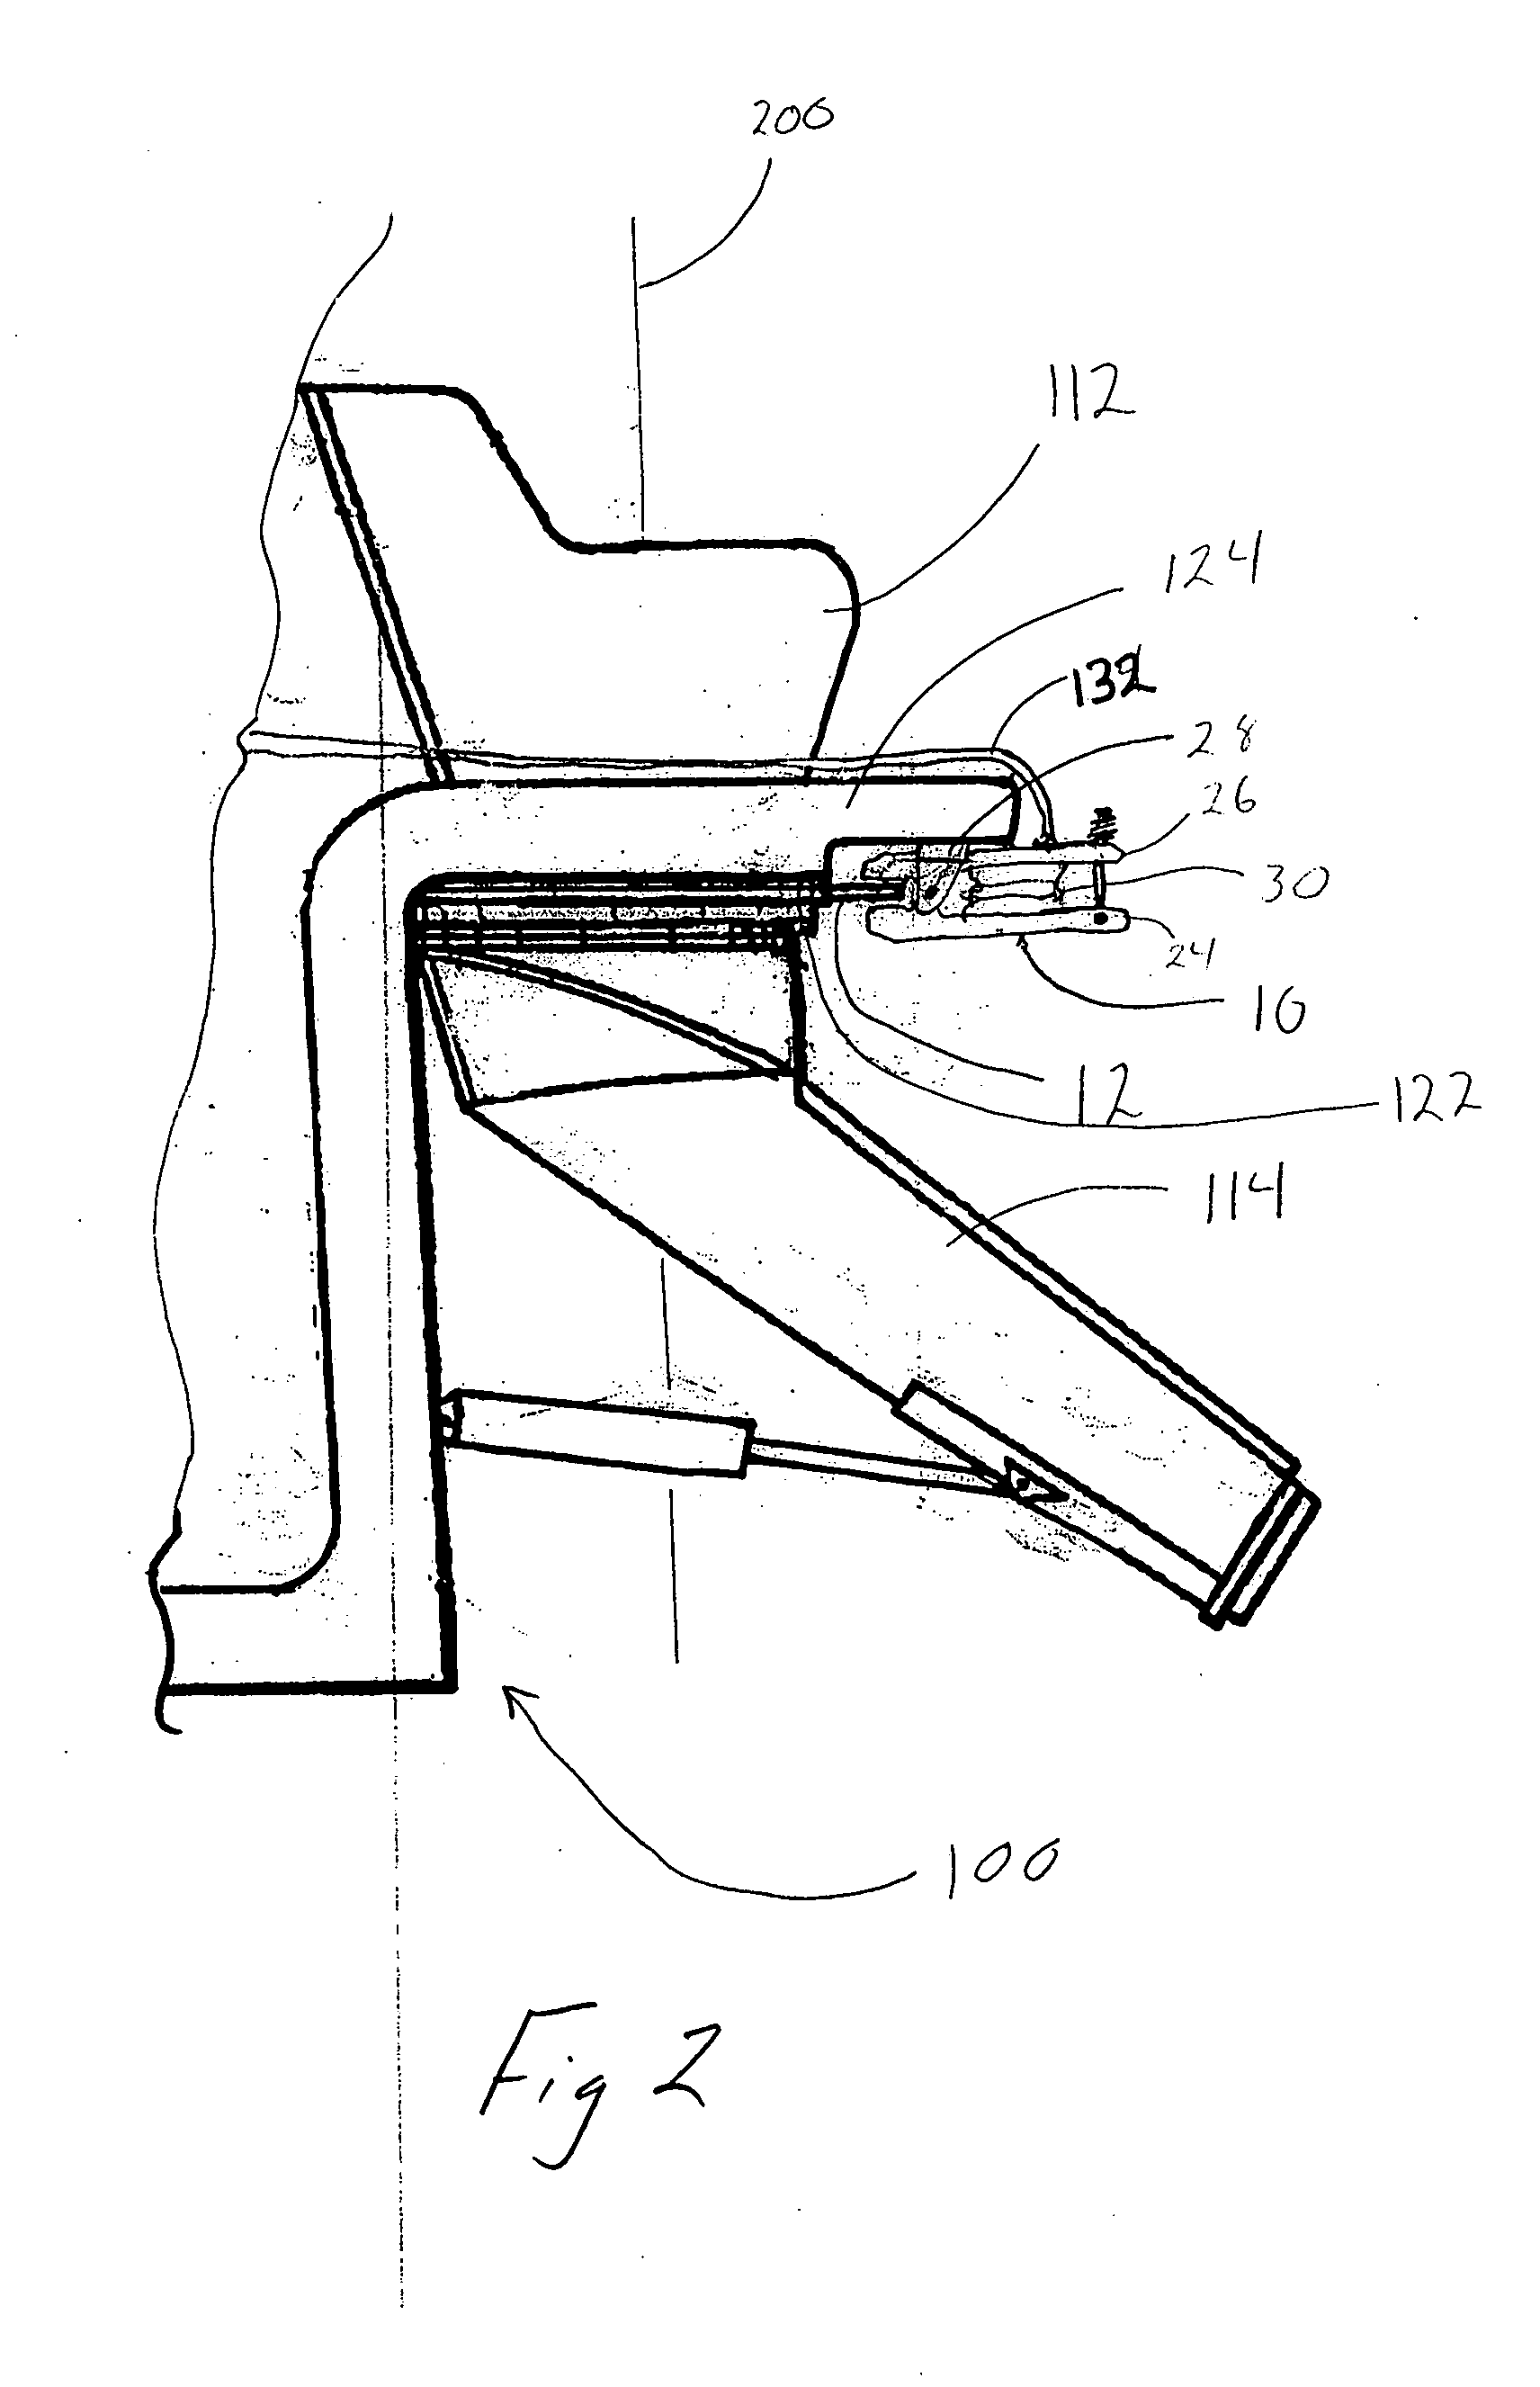 Apparatus and methods for securing discharge chutes on mixing vehicles